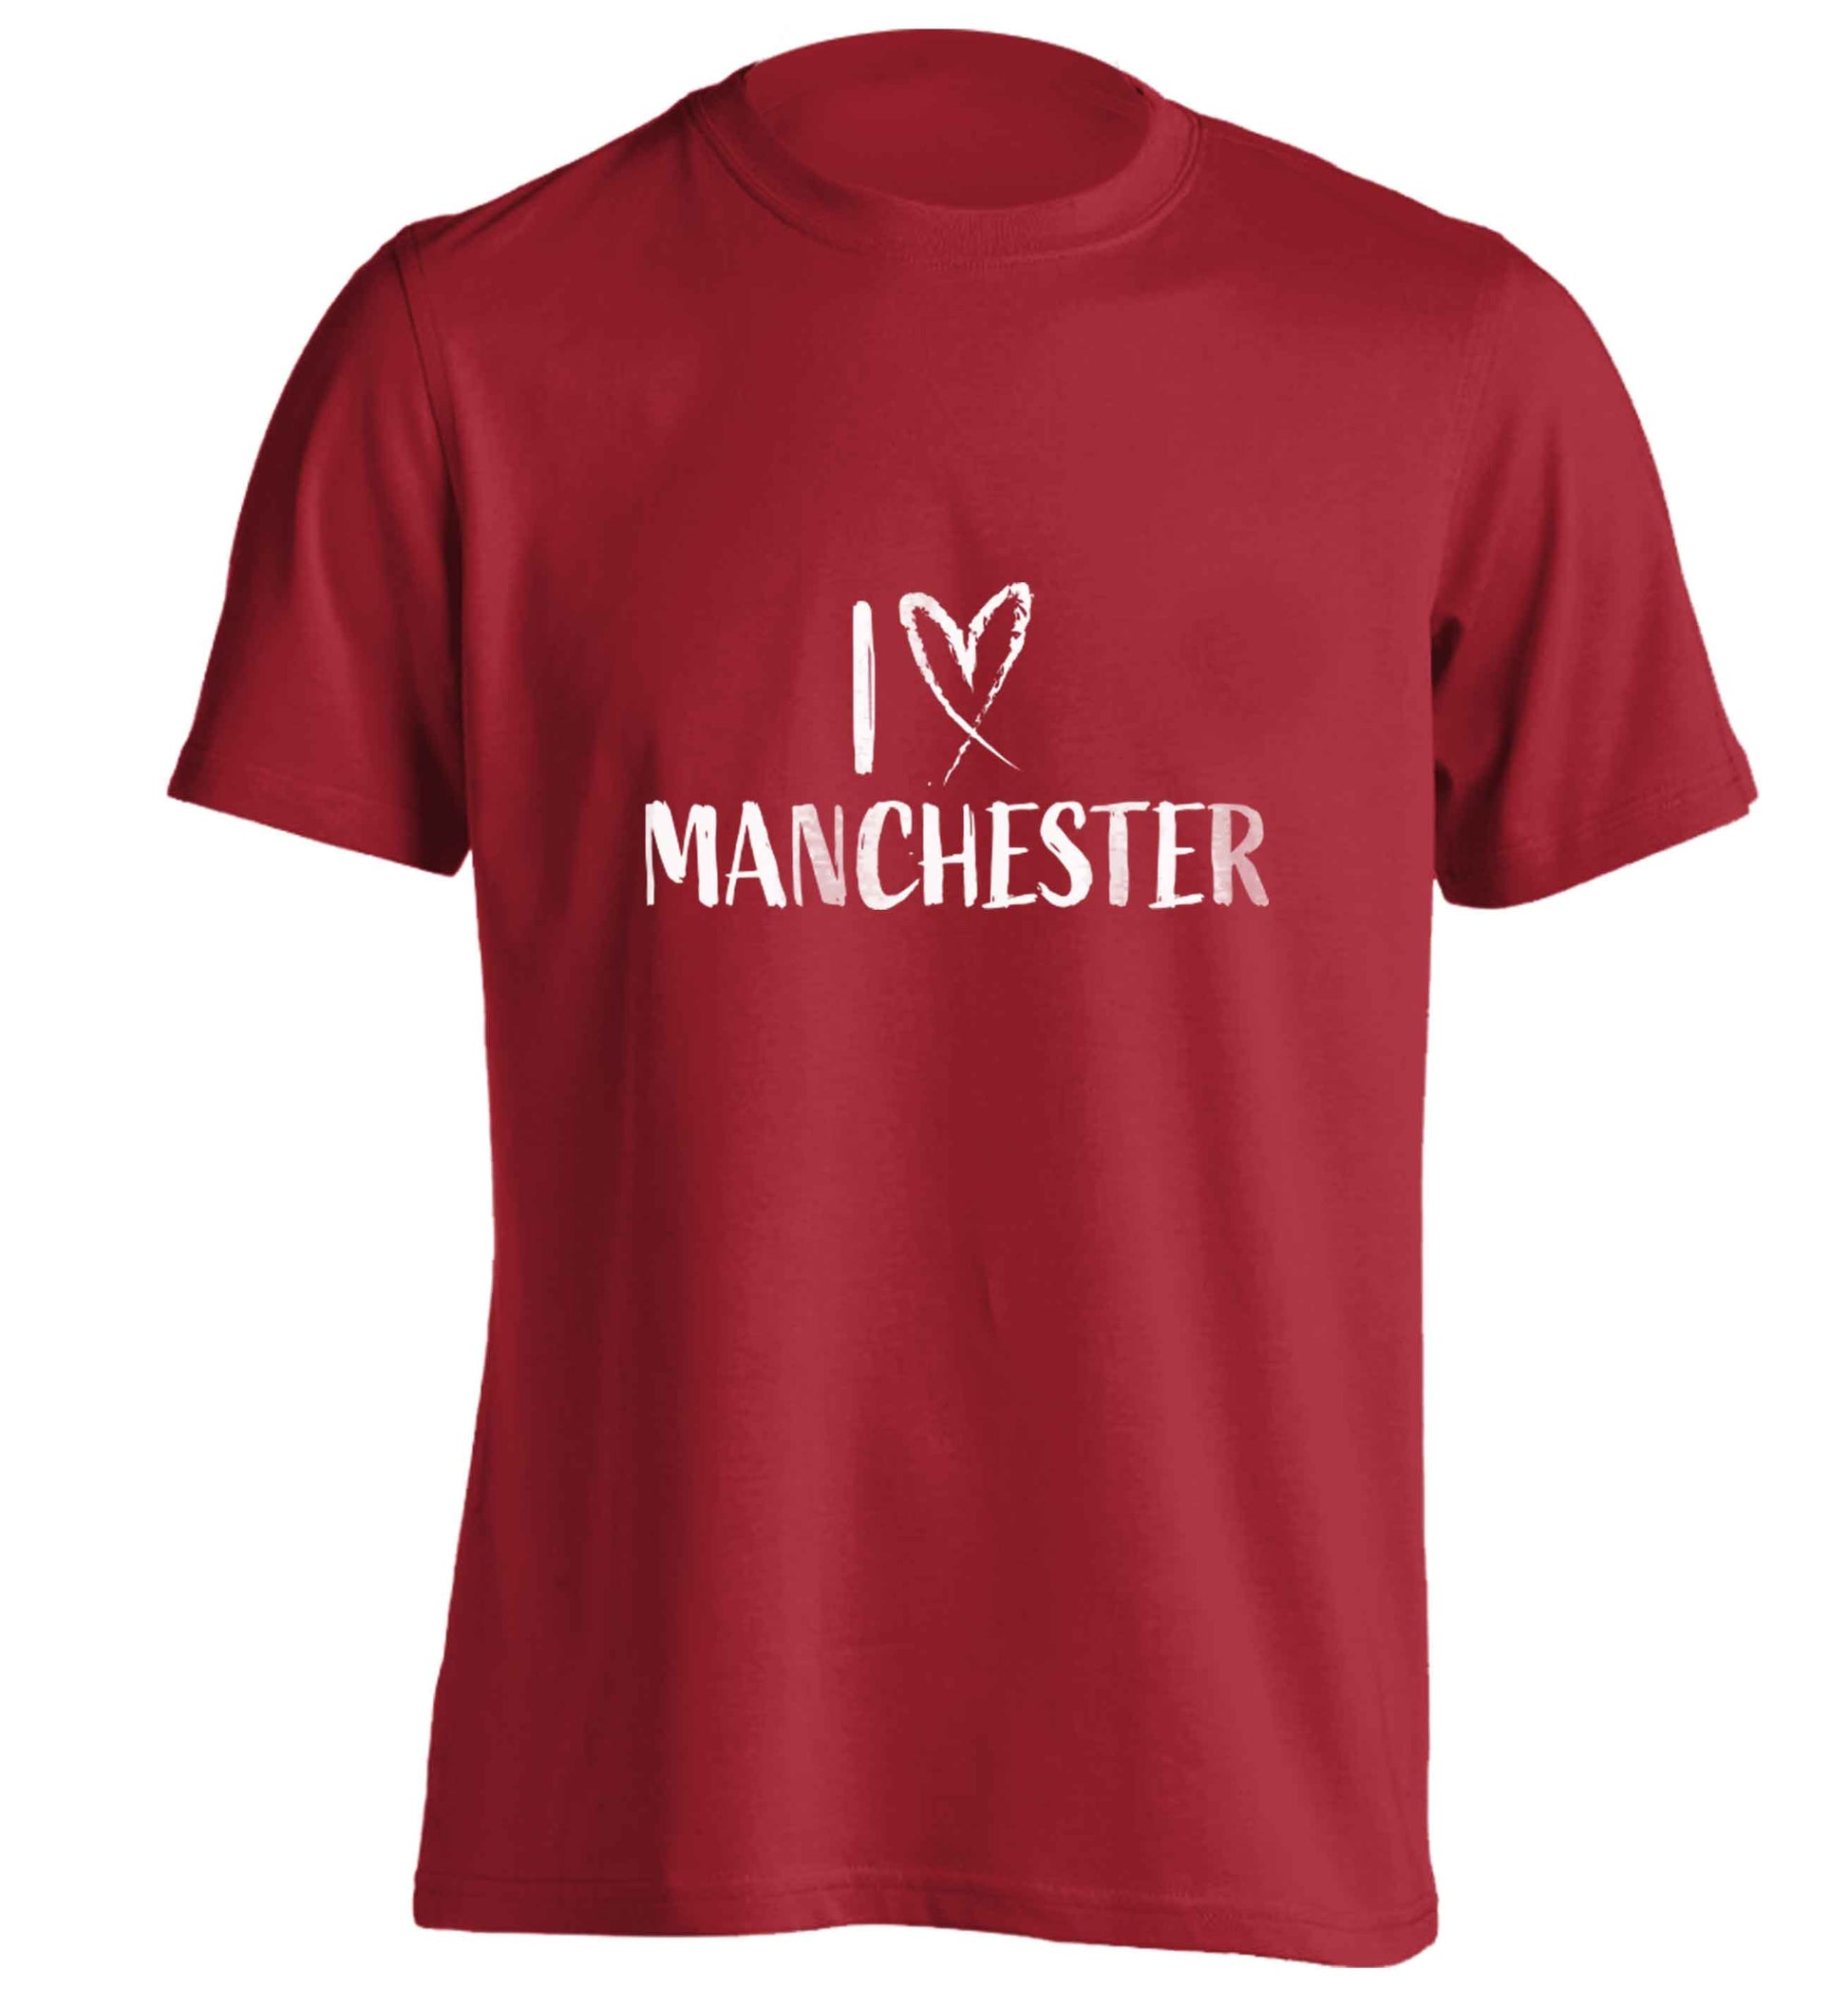 I love Manchester adults unisex red Tshirt 2XL